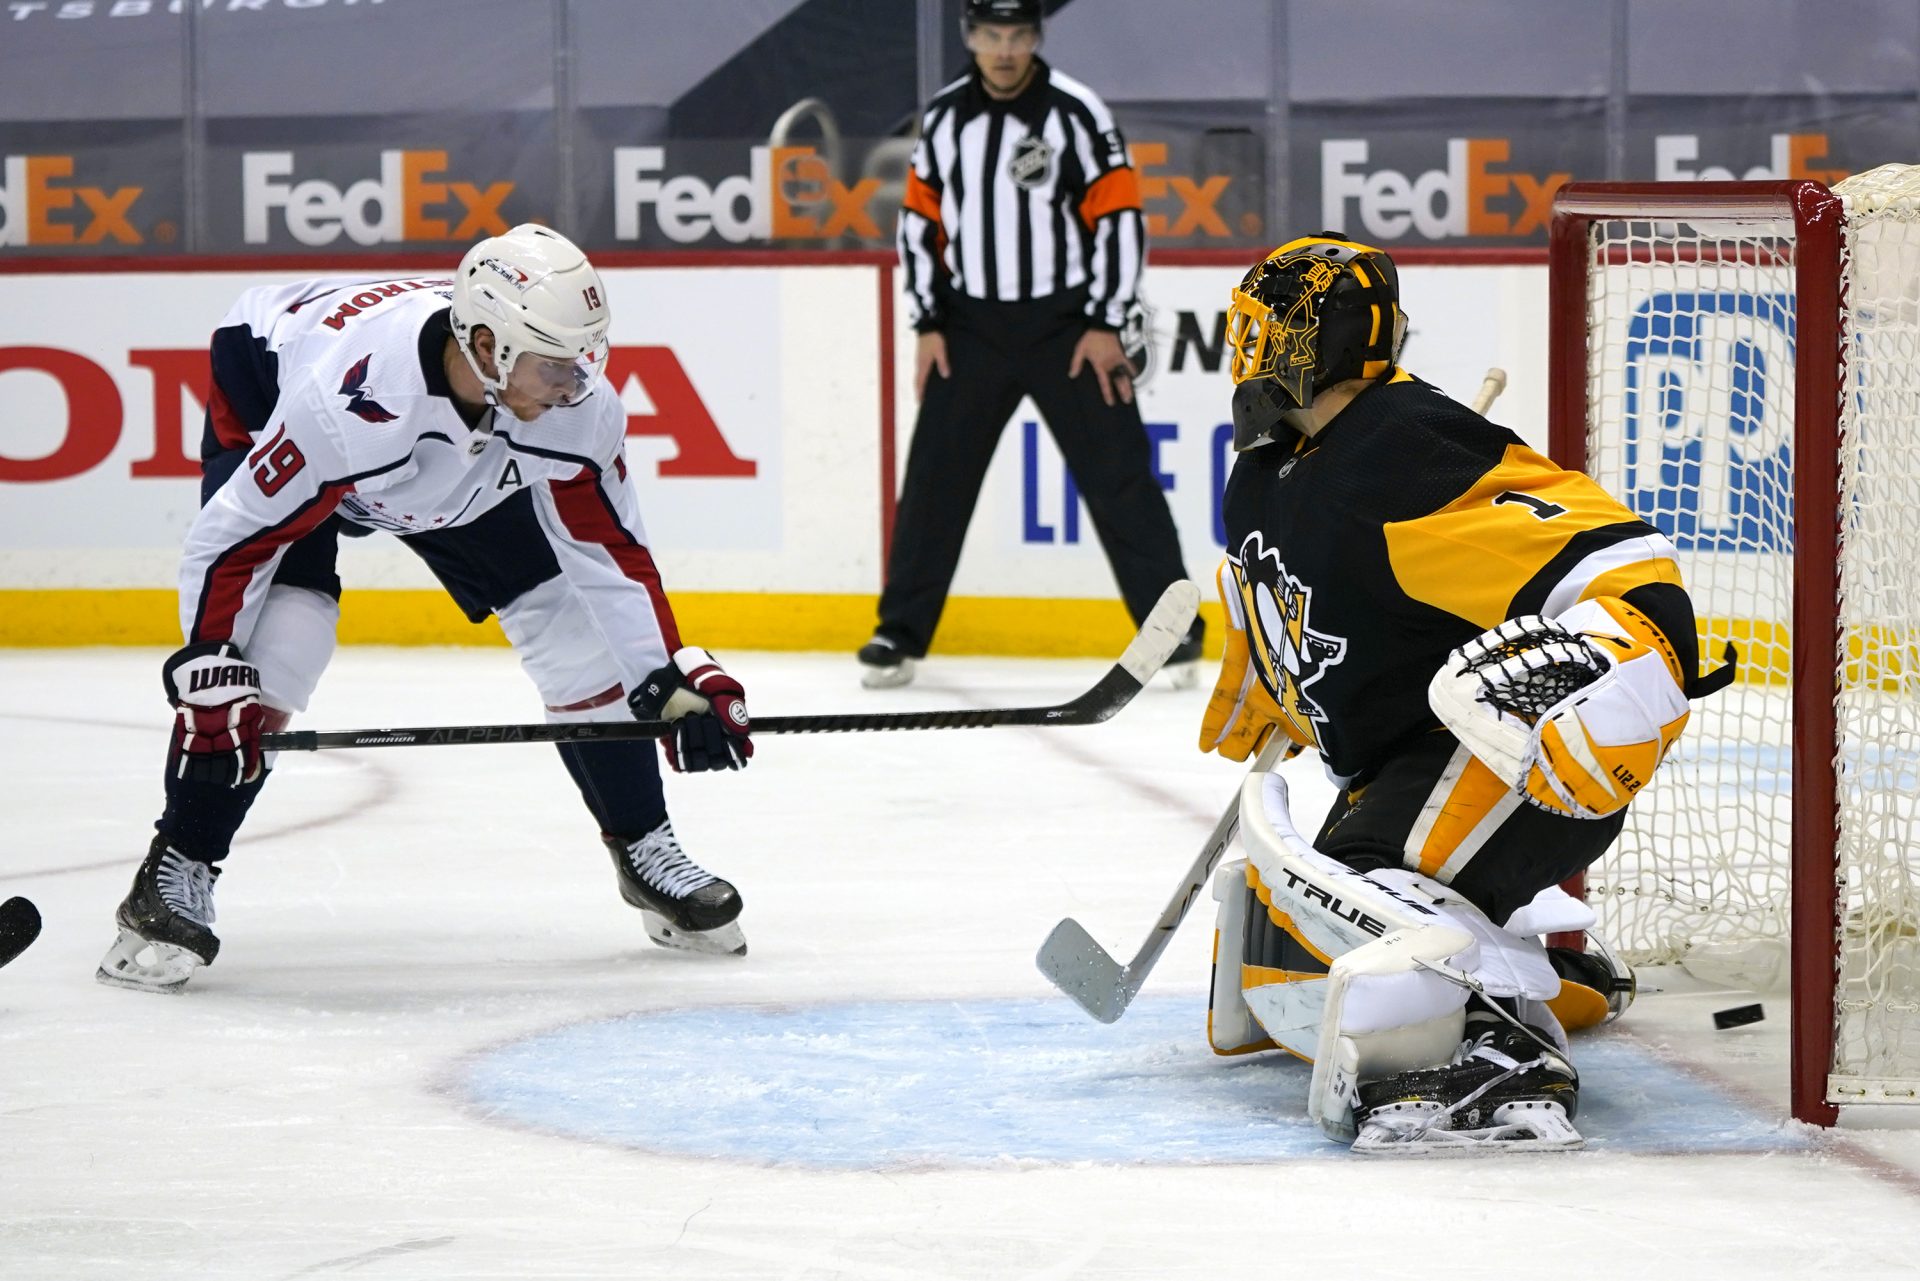 Washington Capitals' Nicklas Backstrom (19) puts the puck behind Pittsburgh Penguins goaltender Casey DeSmith for a goal during the second period of an NHL hockey game in Pittsburgh, Sunday, Jan. 17, 2021.